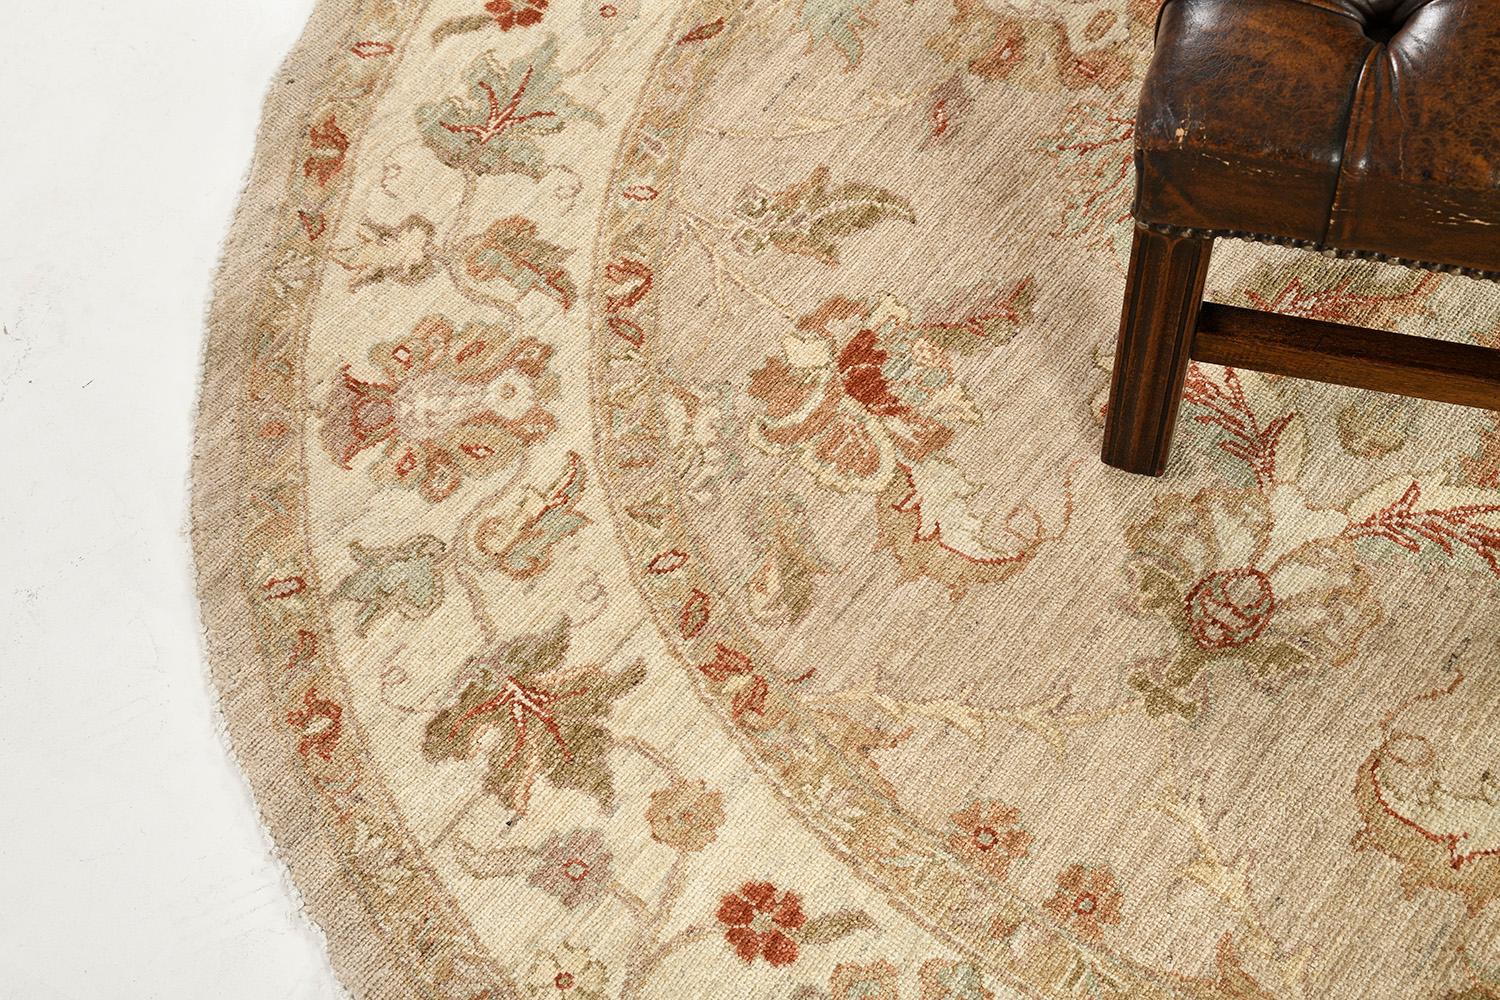 Get intrigued by this Agra Rug that features a floral design that complements the gray hues scheme. Series of symmetrically leafy scrolls, tendrils, and blooming elements are featured in a neutral-toned round-shaped rug. Perfect for your home